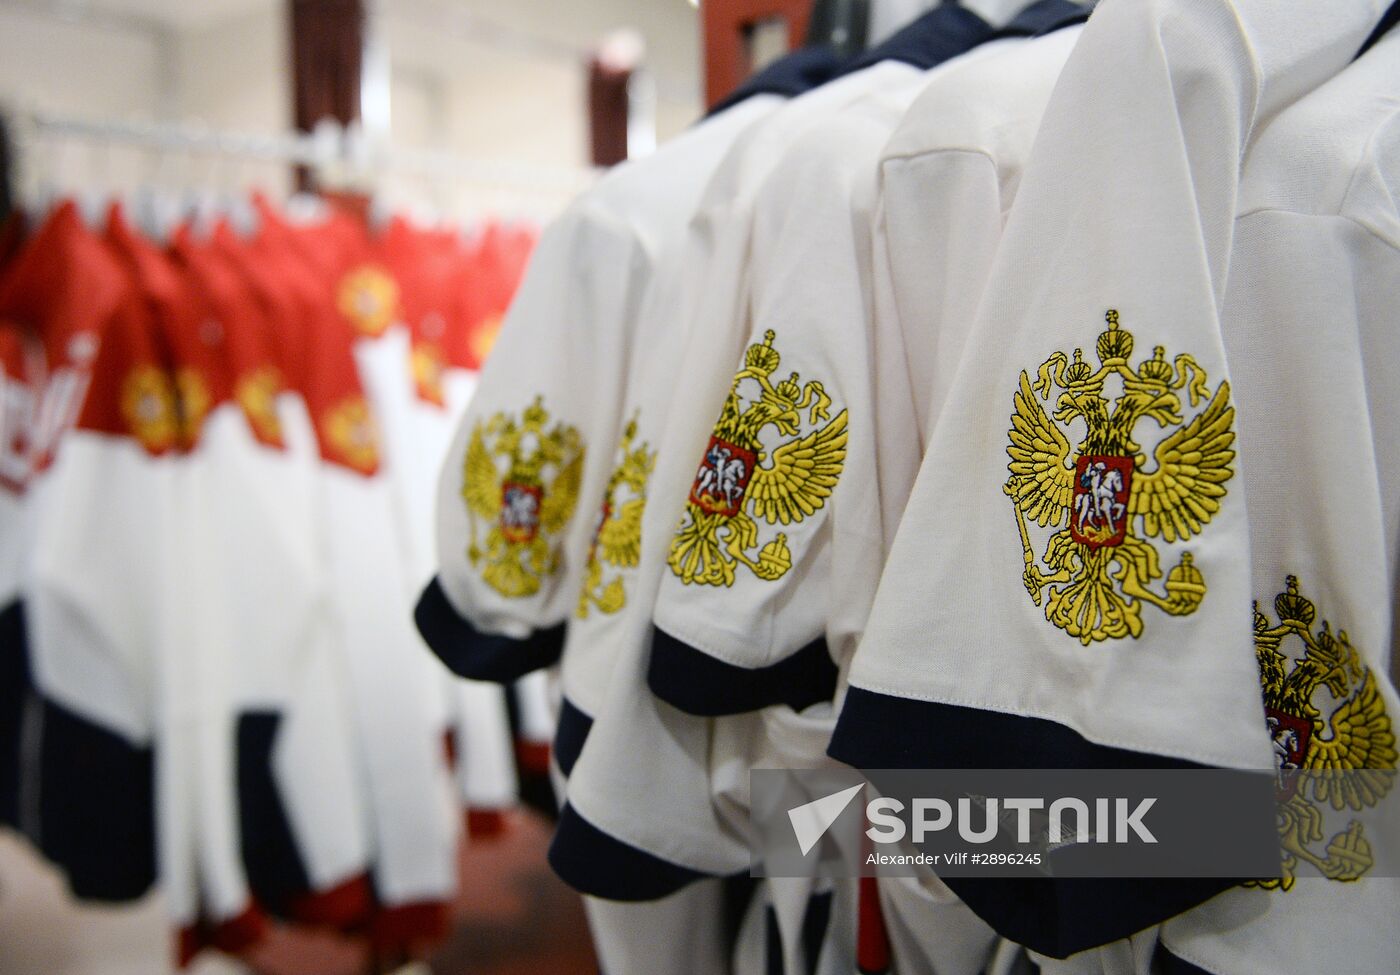 Russian Olympic athletic and freestyle wrestling teams' gear for the 2016 Olympics